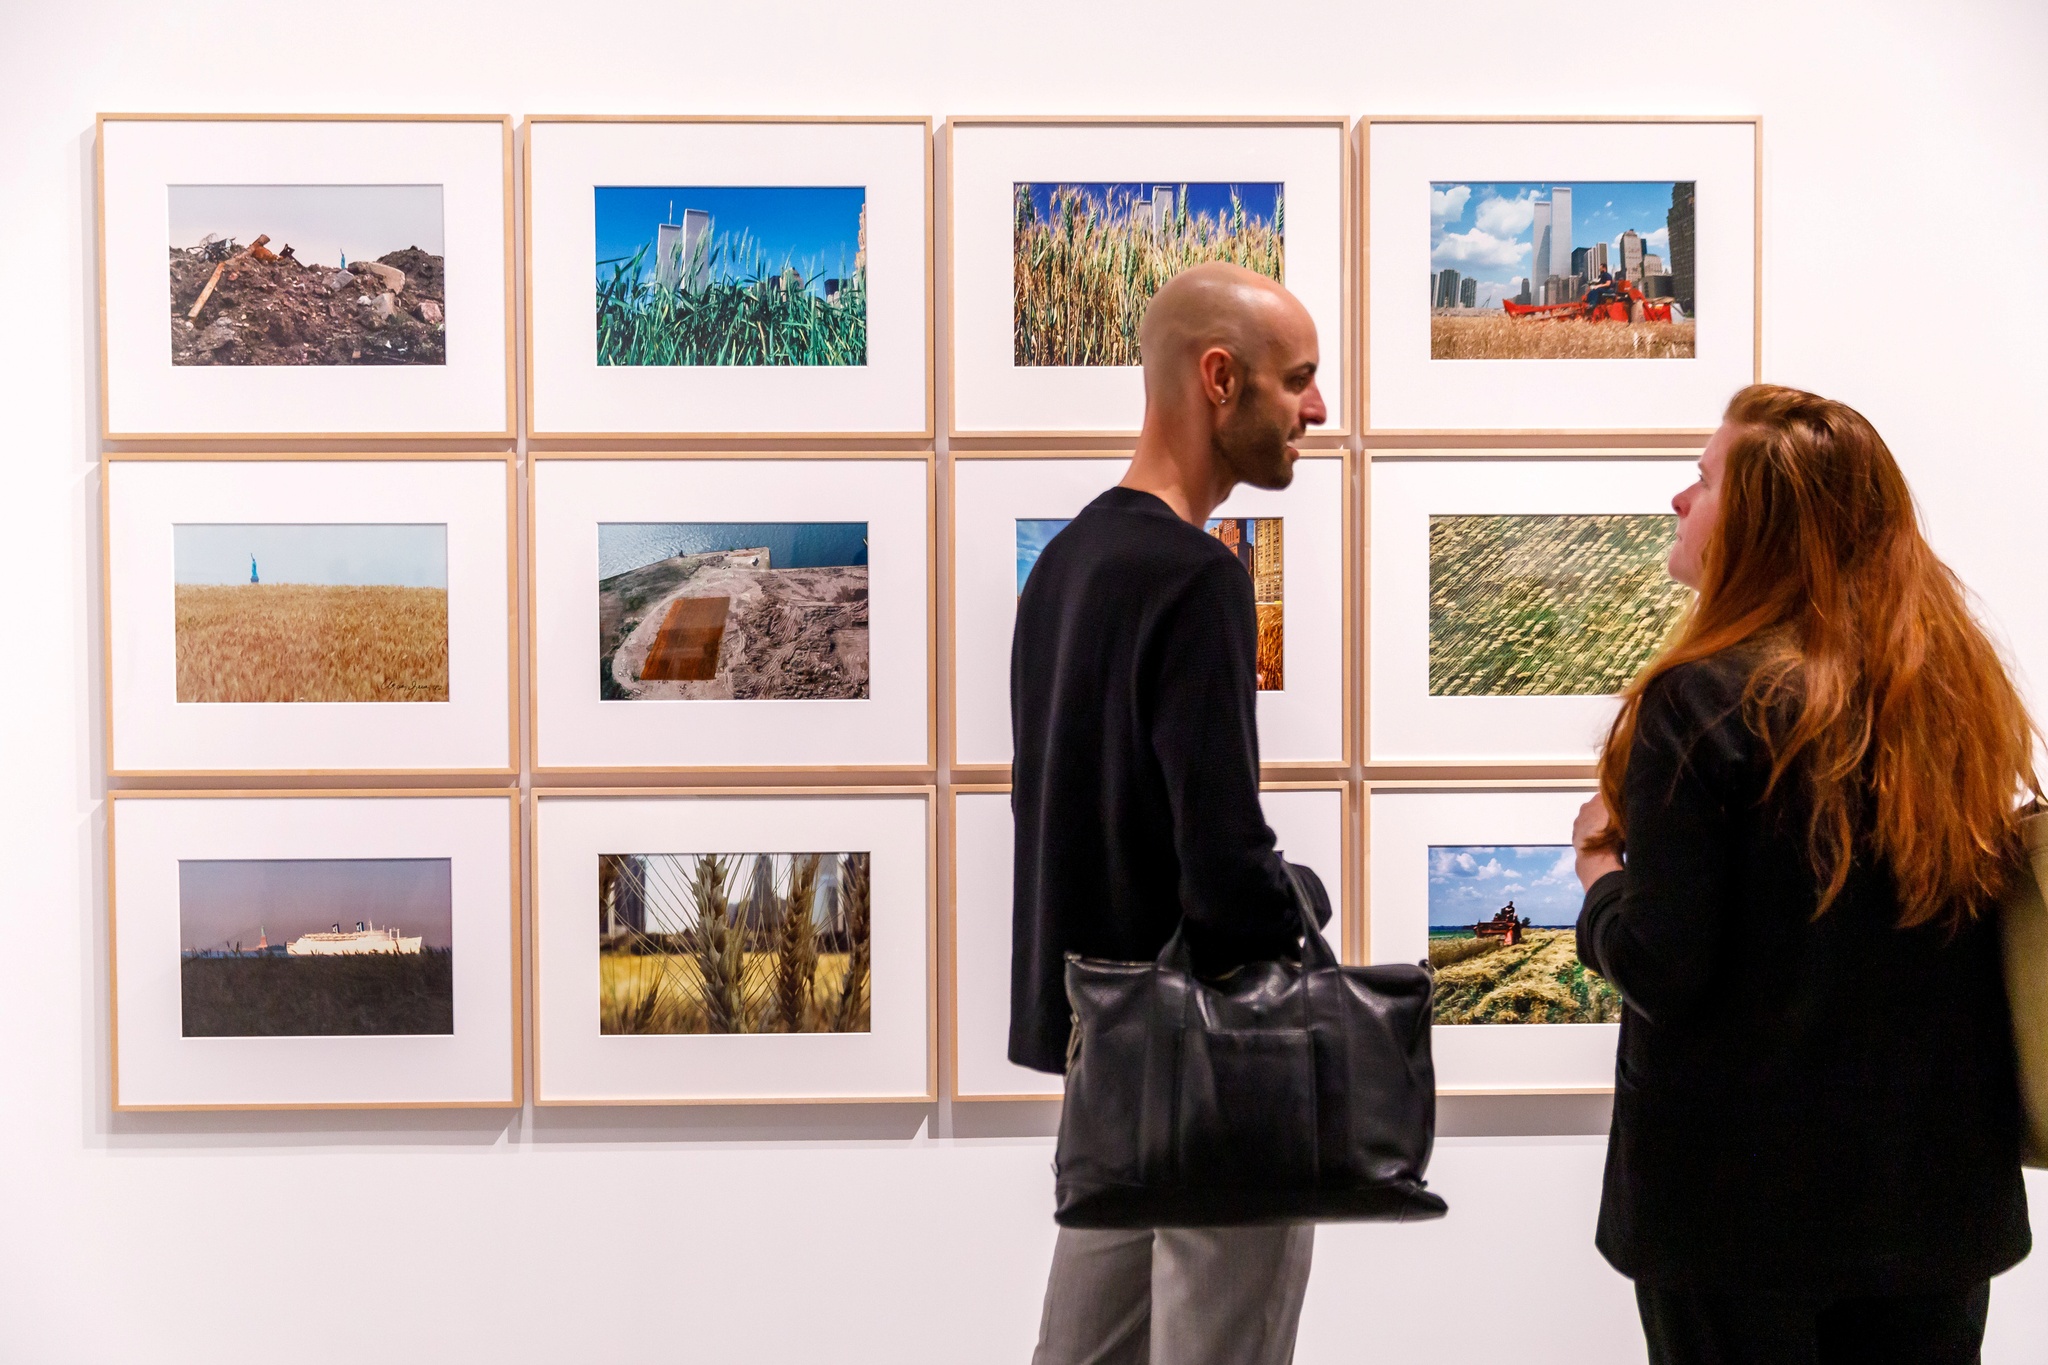 Two people facing each other talking in front of a grid of photographs hung on a gallery wall depicting a wheat field planted by the artist Agnes Denes in Manhattan in 1980